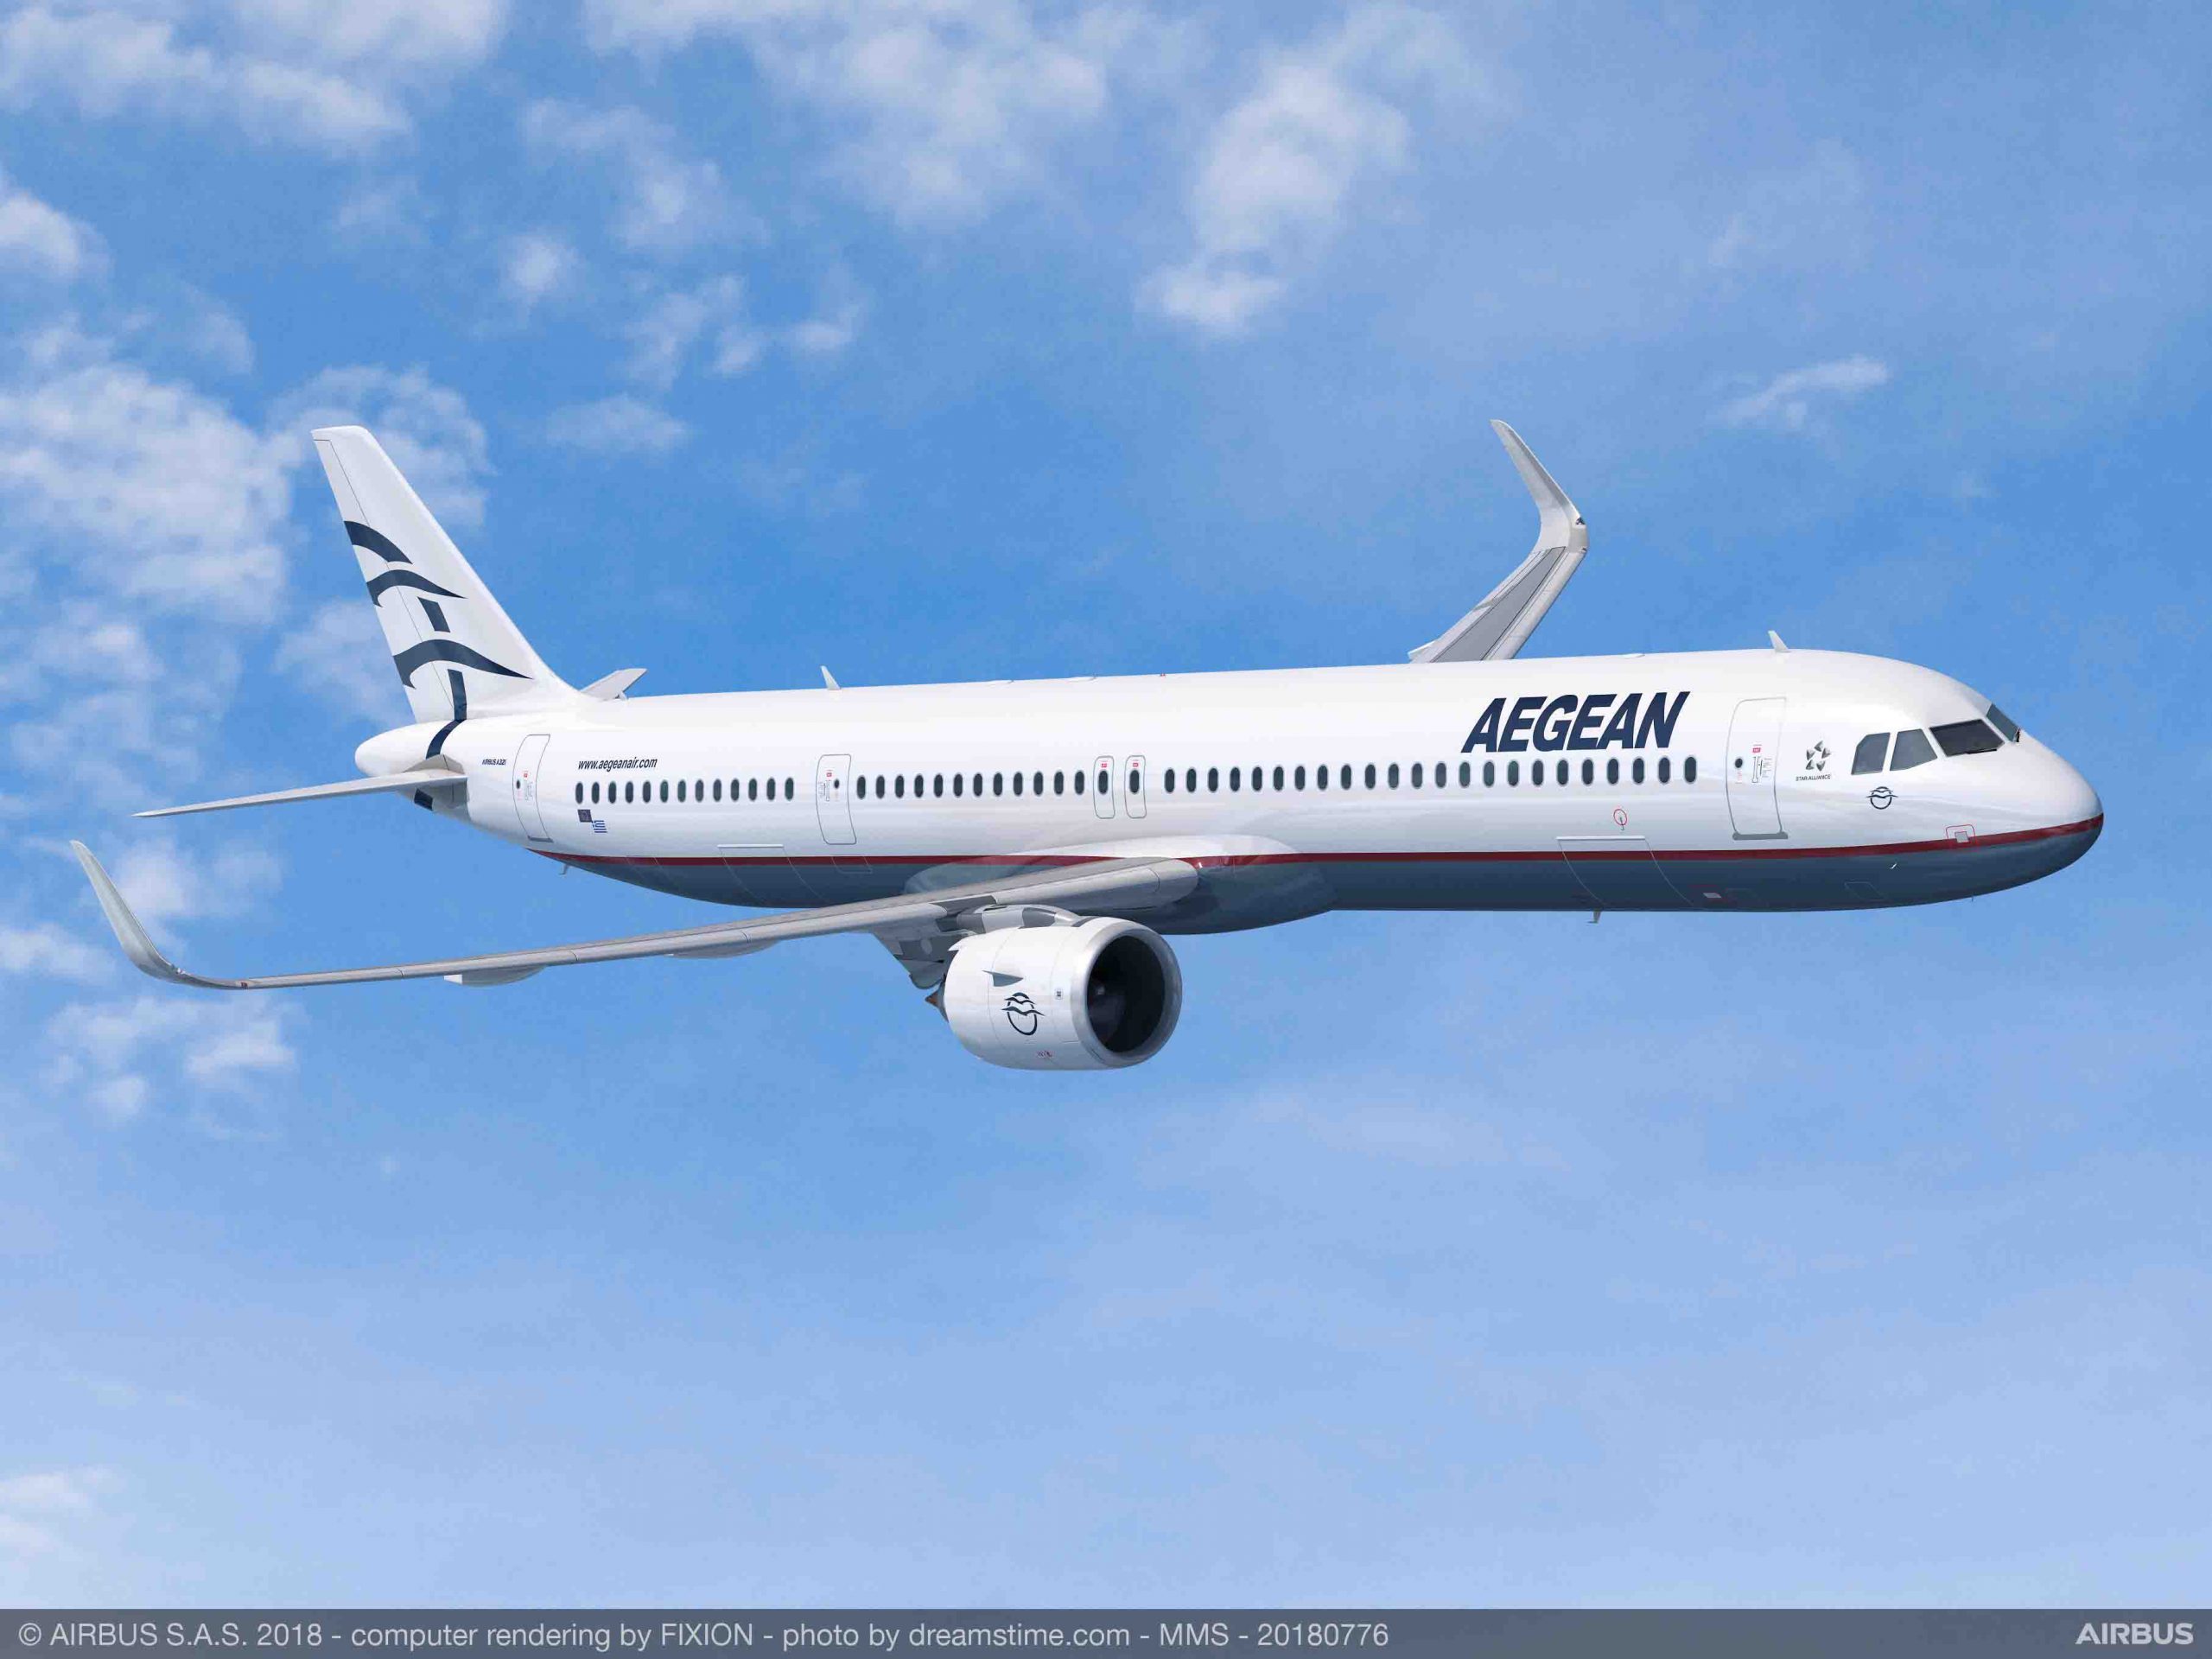 Aegean Airlines reports first half 2018 performance